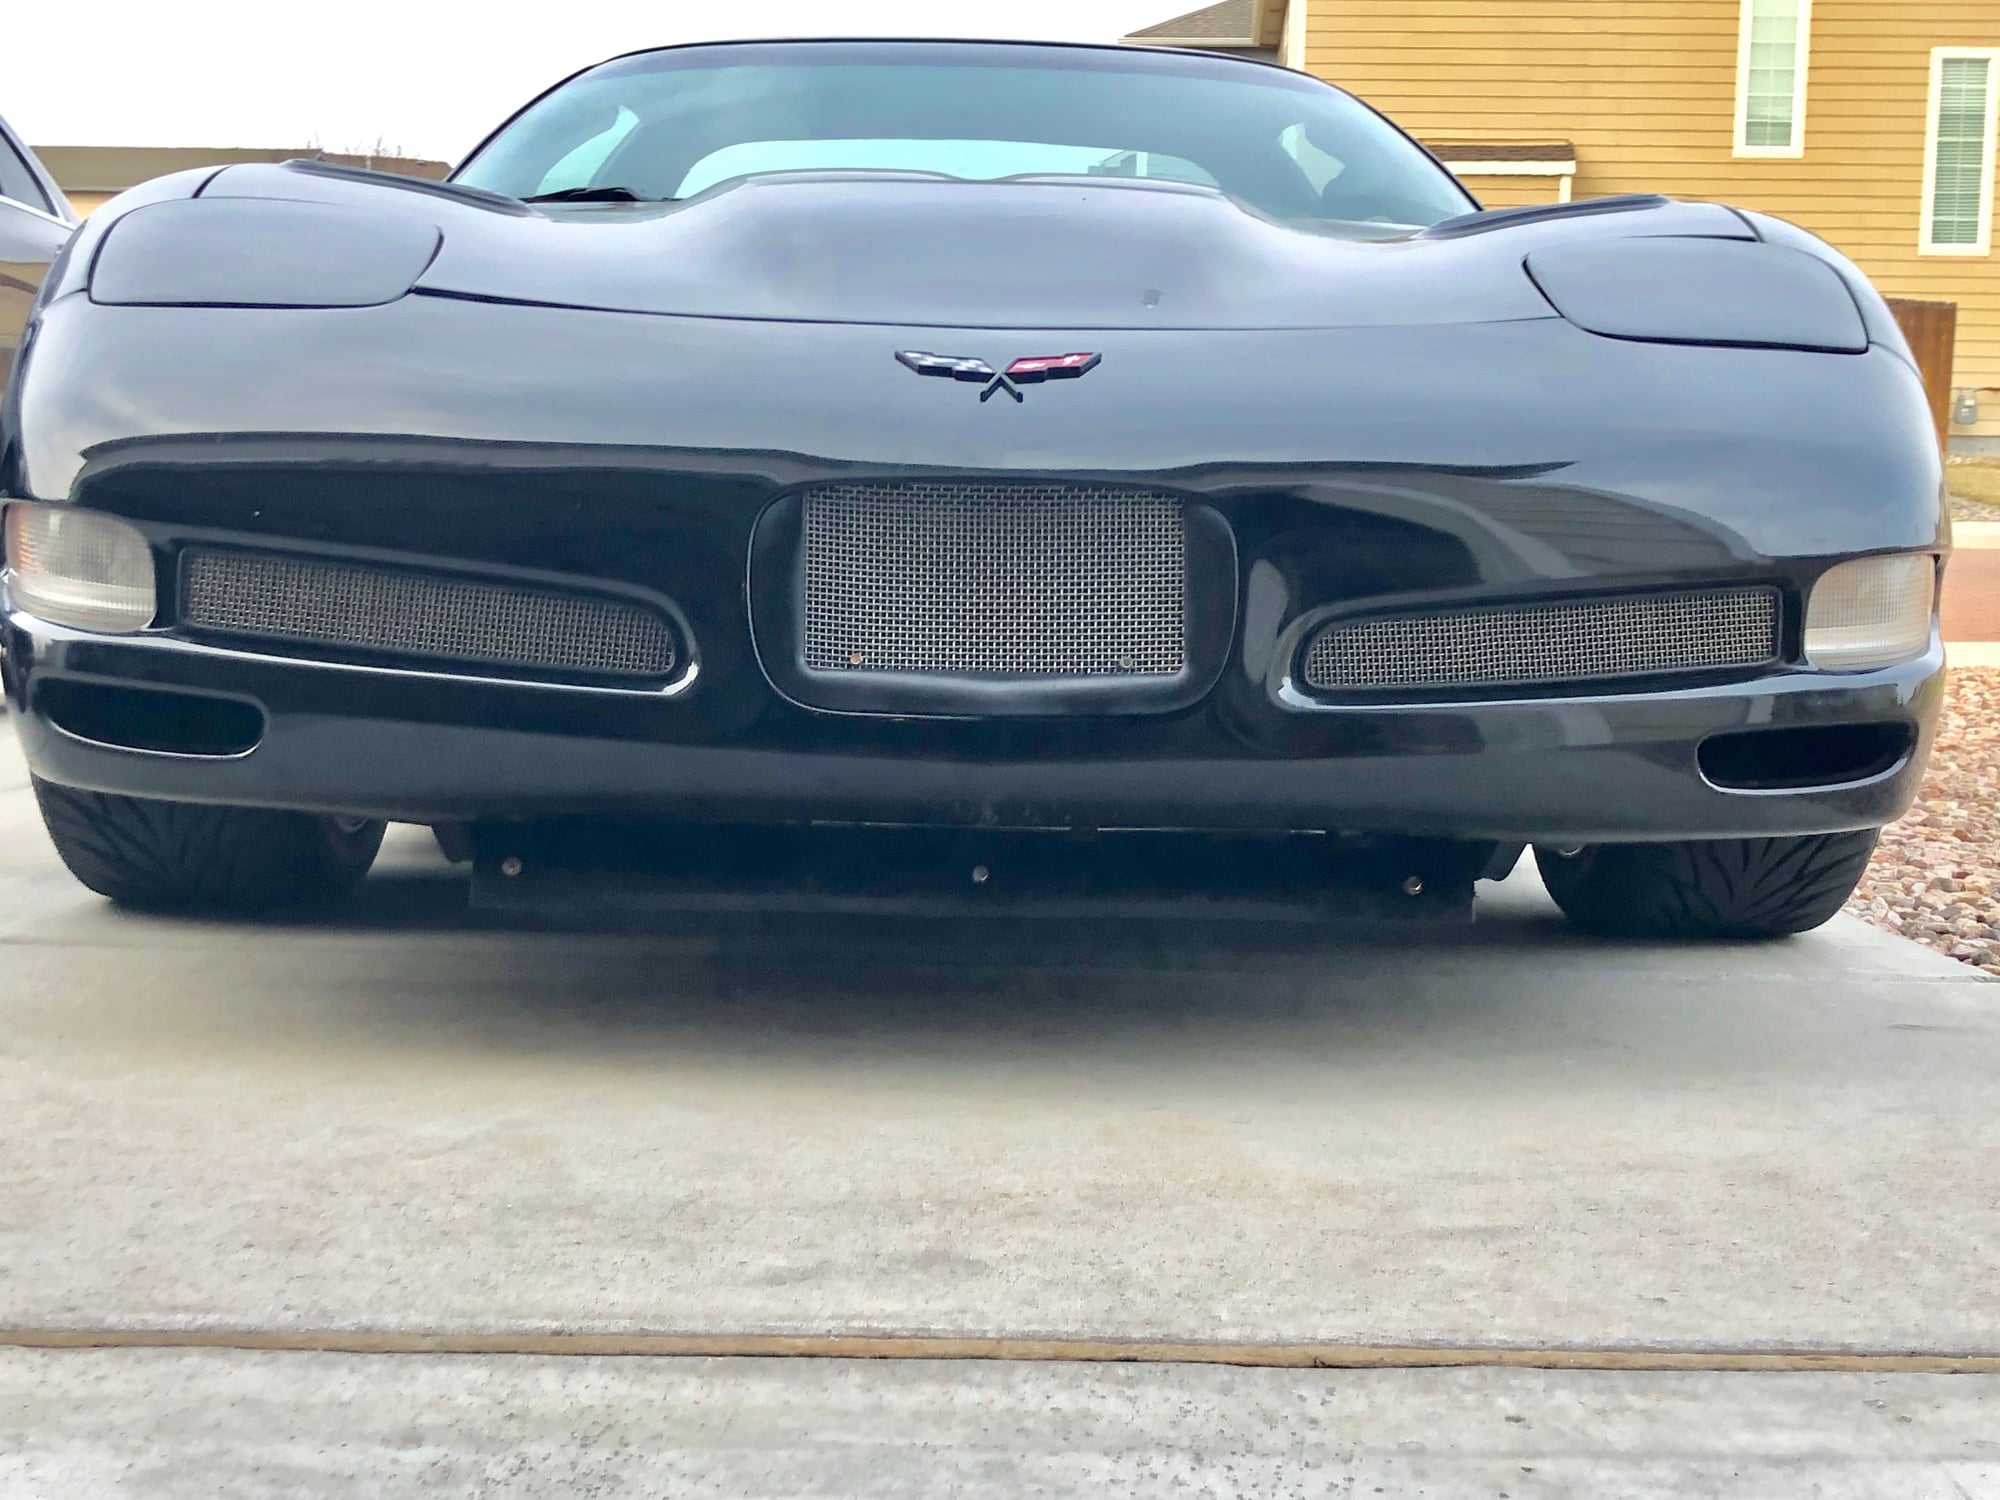 2001 Chevrolet Corvette - 2001 Z06 Corvette - Used - VIN 1G1YY12S315134725 - 8 cyl - 2WD - Automatic - Coupe - Black - Colorado Springs, CO 80925, United States